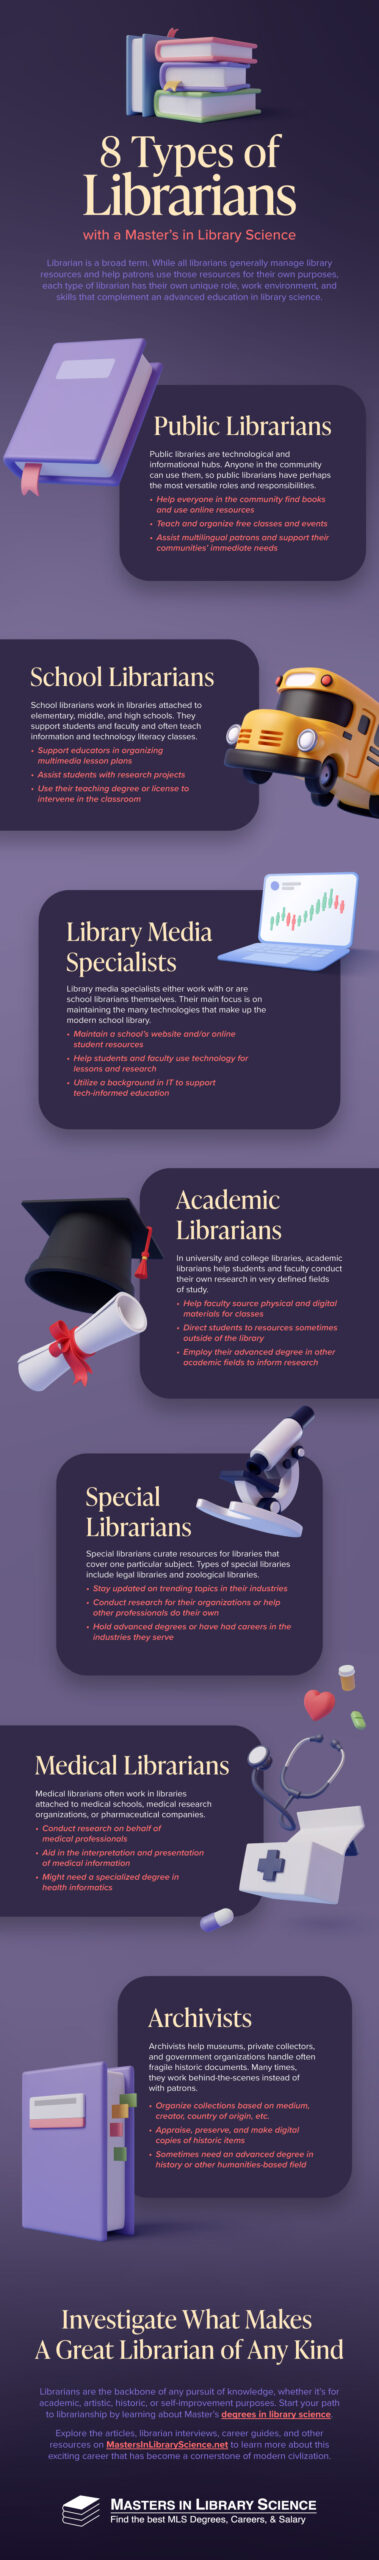 8 types of librarians infographic